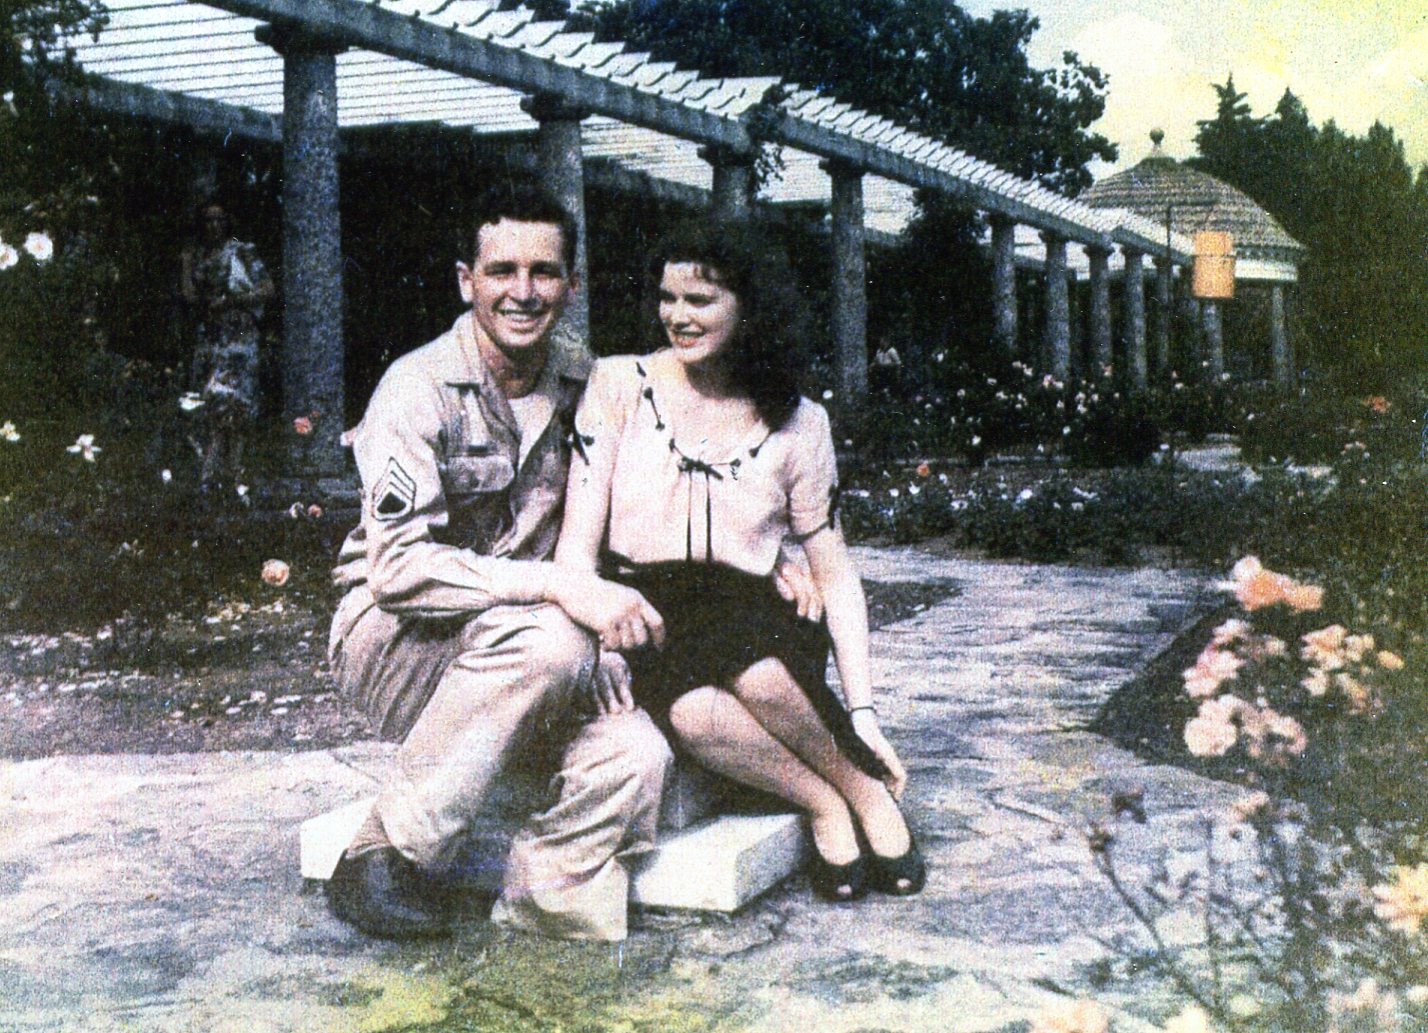 S/Sgt. Bill Blank and his fiance at Walter Reed Hospital in late 1945